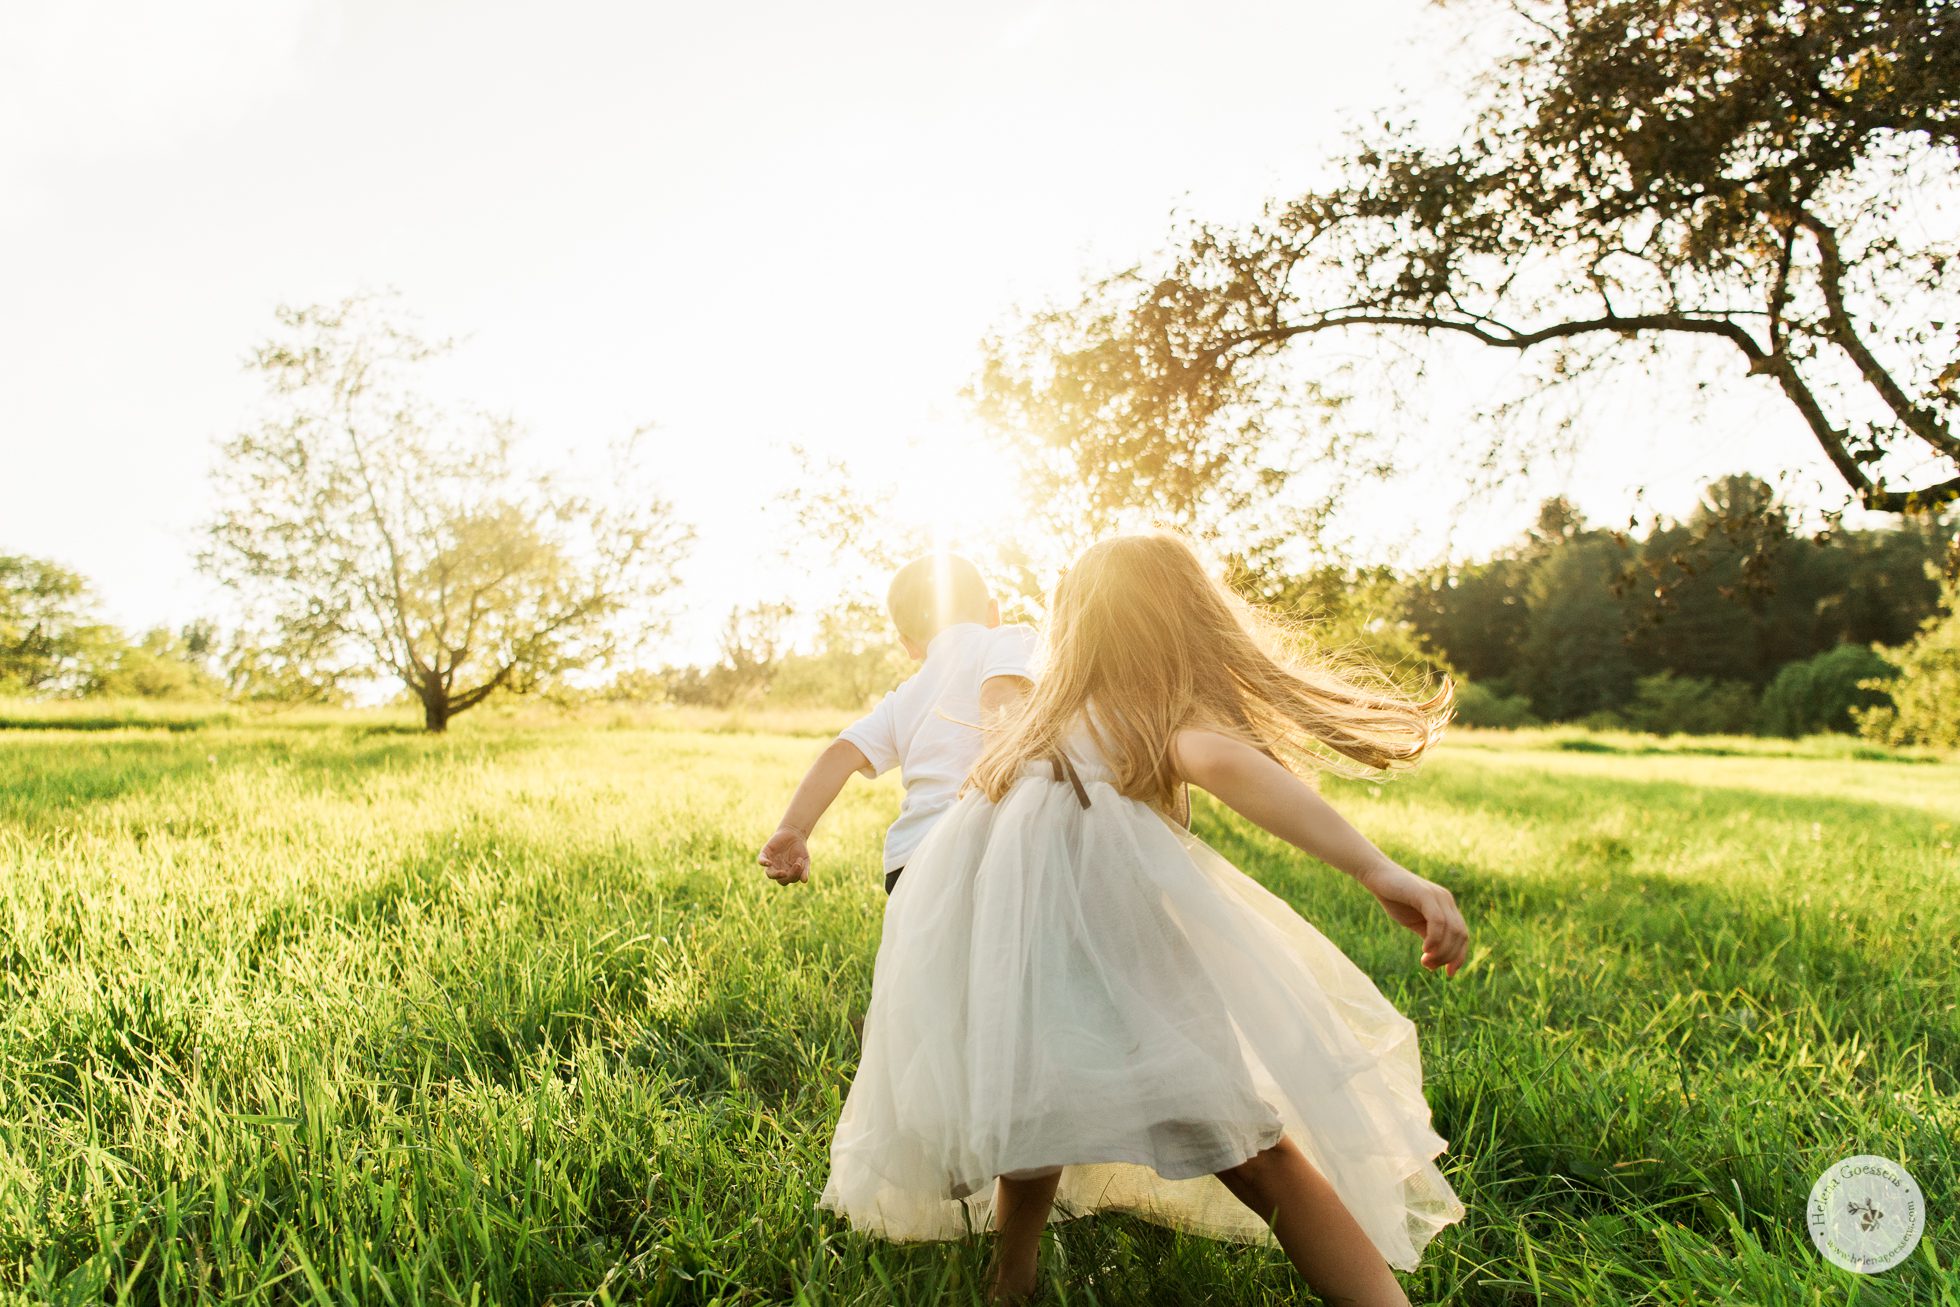 kids playing in a green field at sunset. Image by Helena goessens Photography.